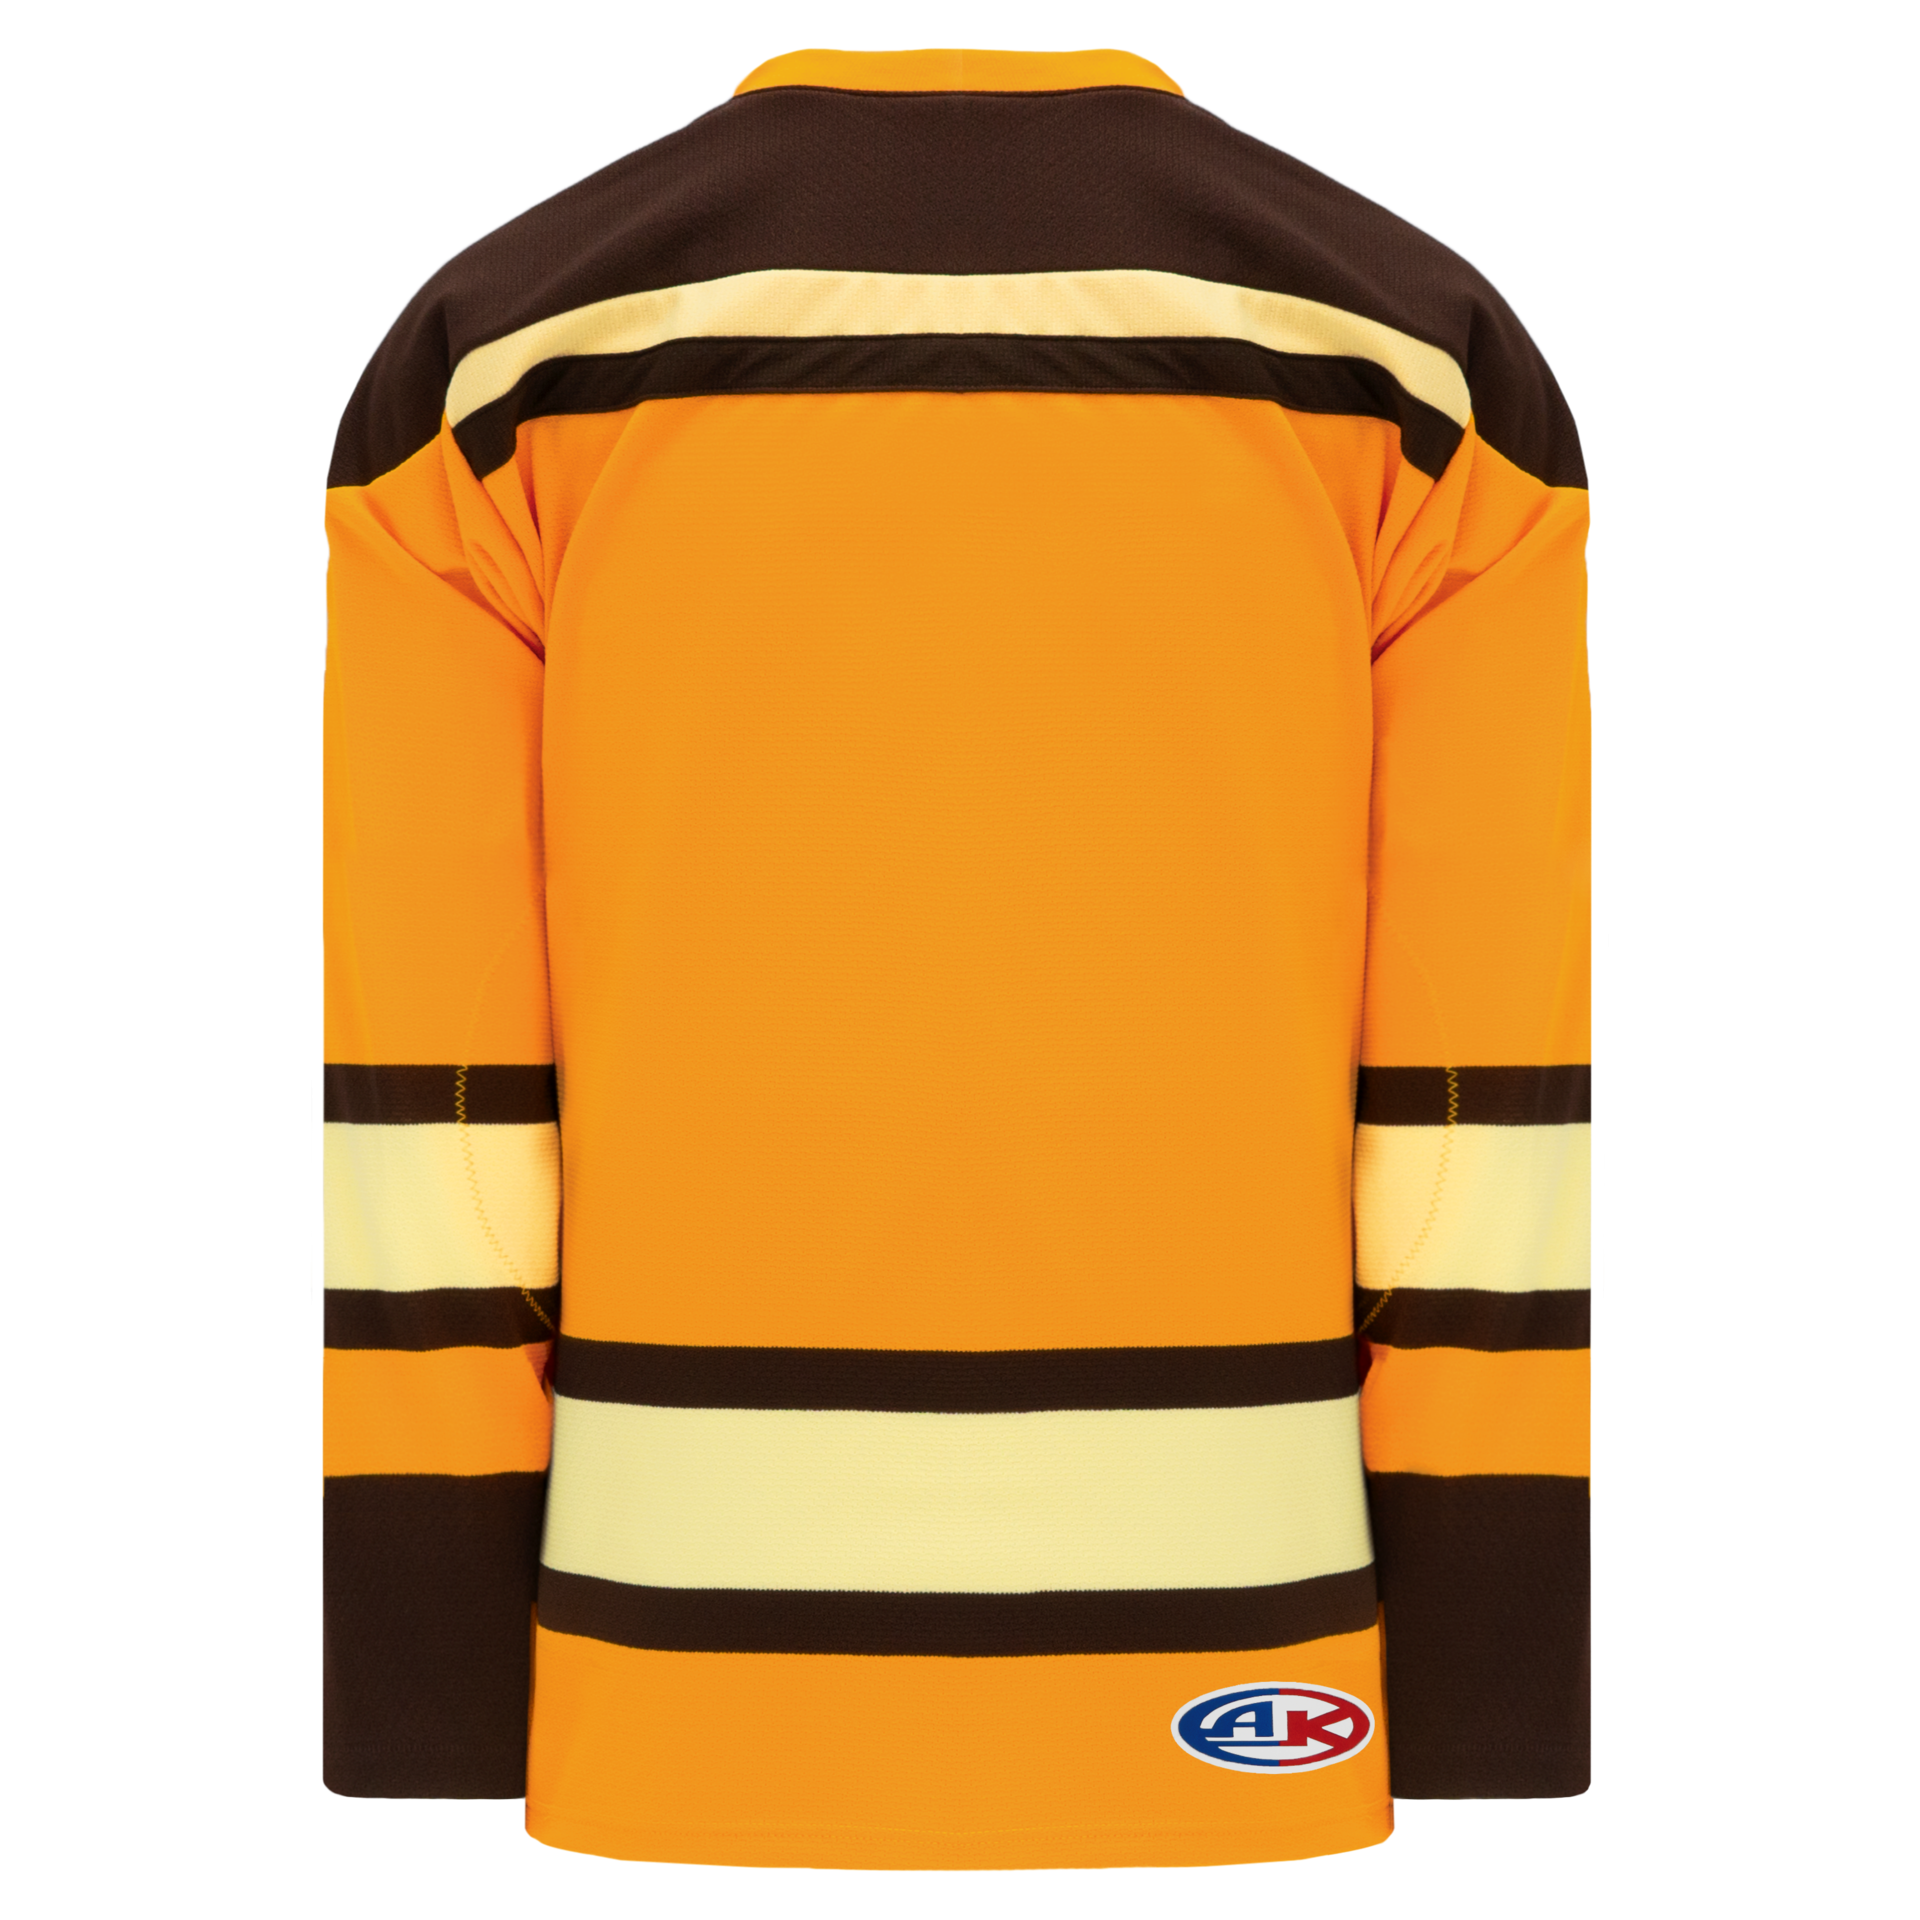 Vintage, Sweaters, Vintage Boston Bruins Laceup Knit Sweater Jersey